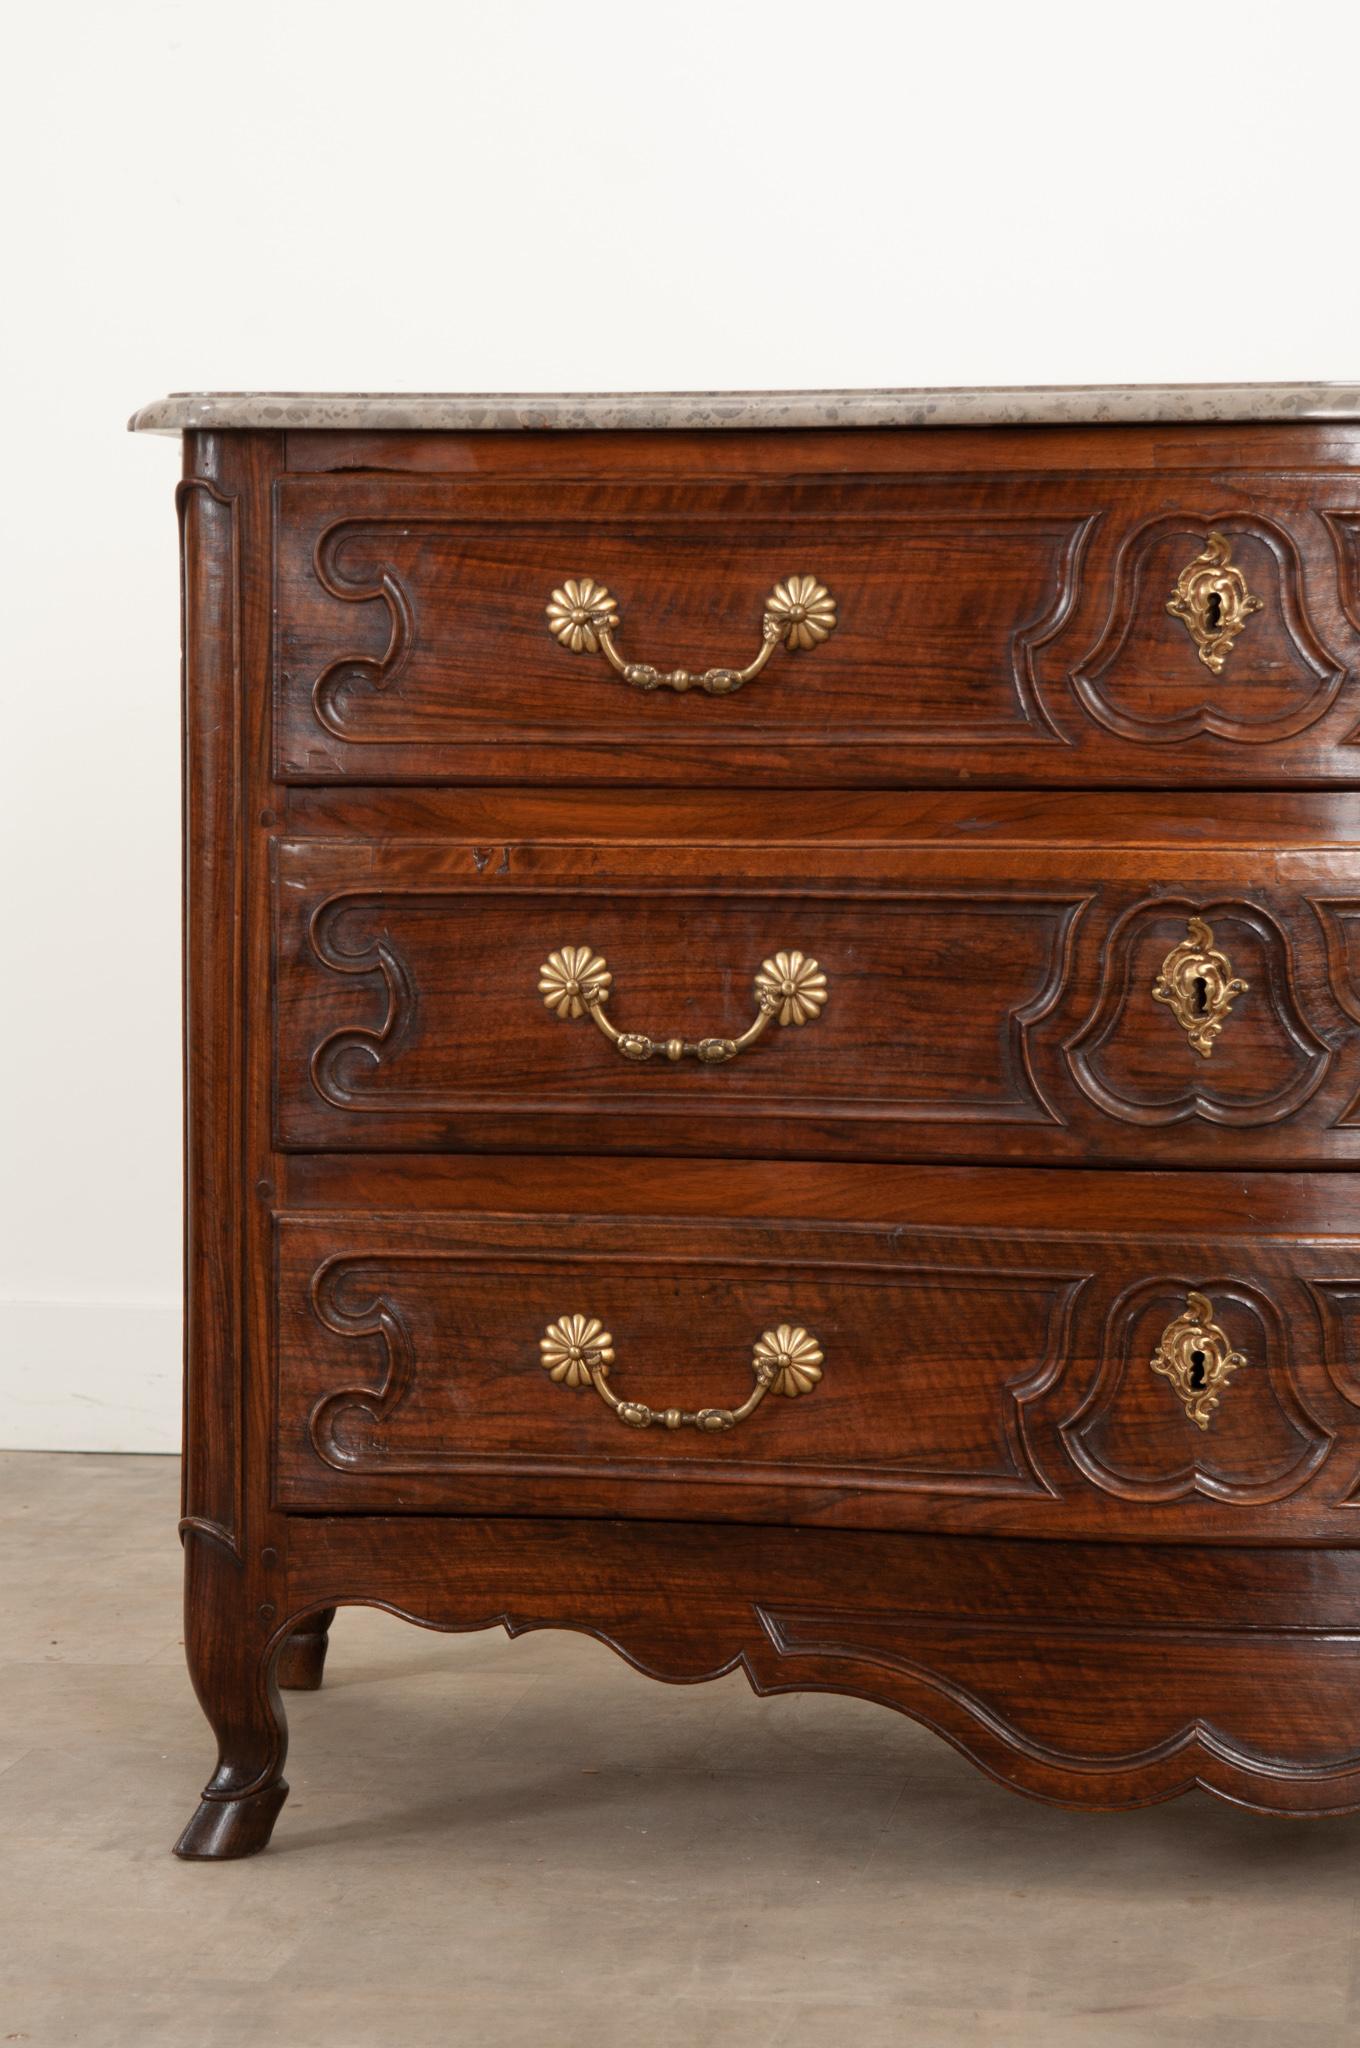 French Parisian 18th Century Rosewood Commode In Good Condition For Sale In Baton Rouge, LA